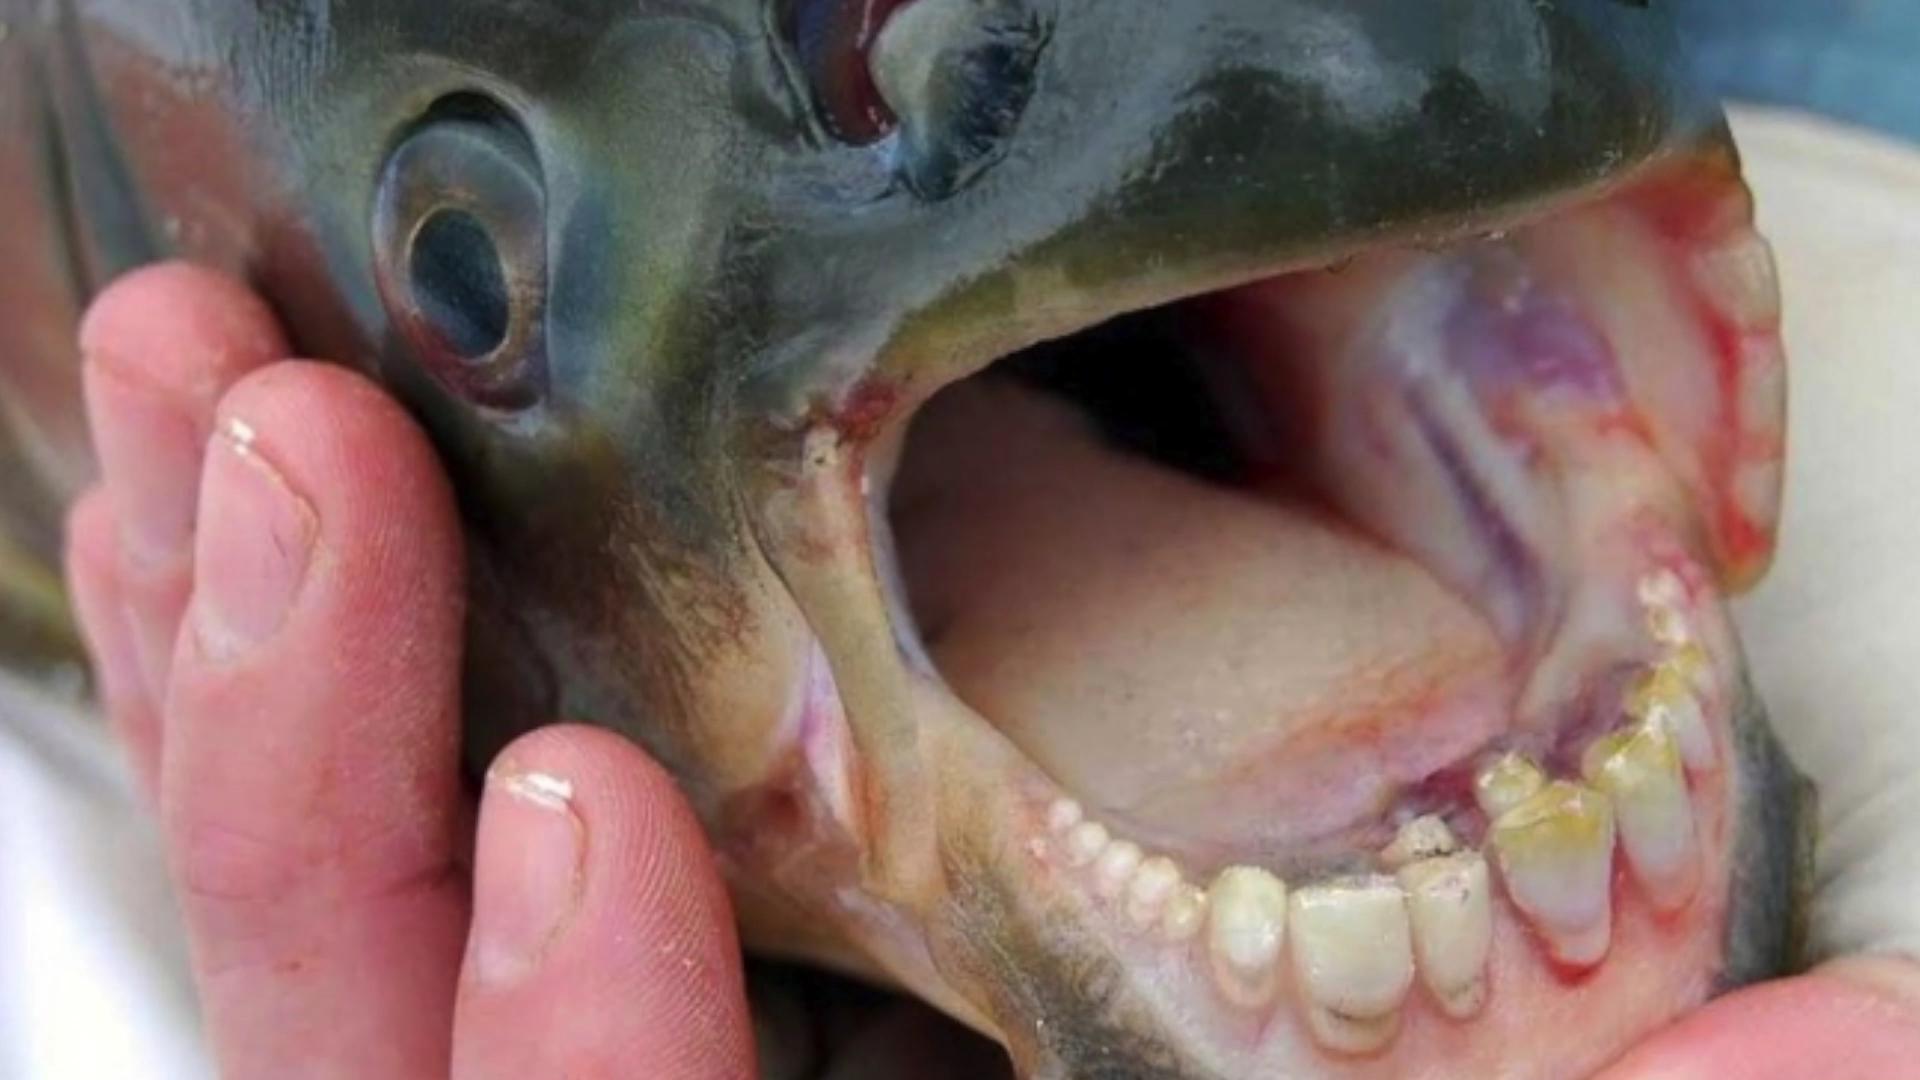 Fish with human teeth found in New Jersey